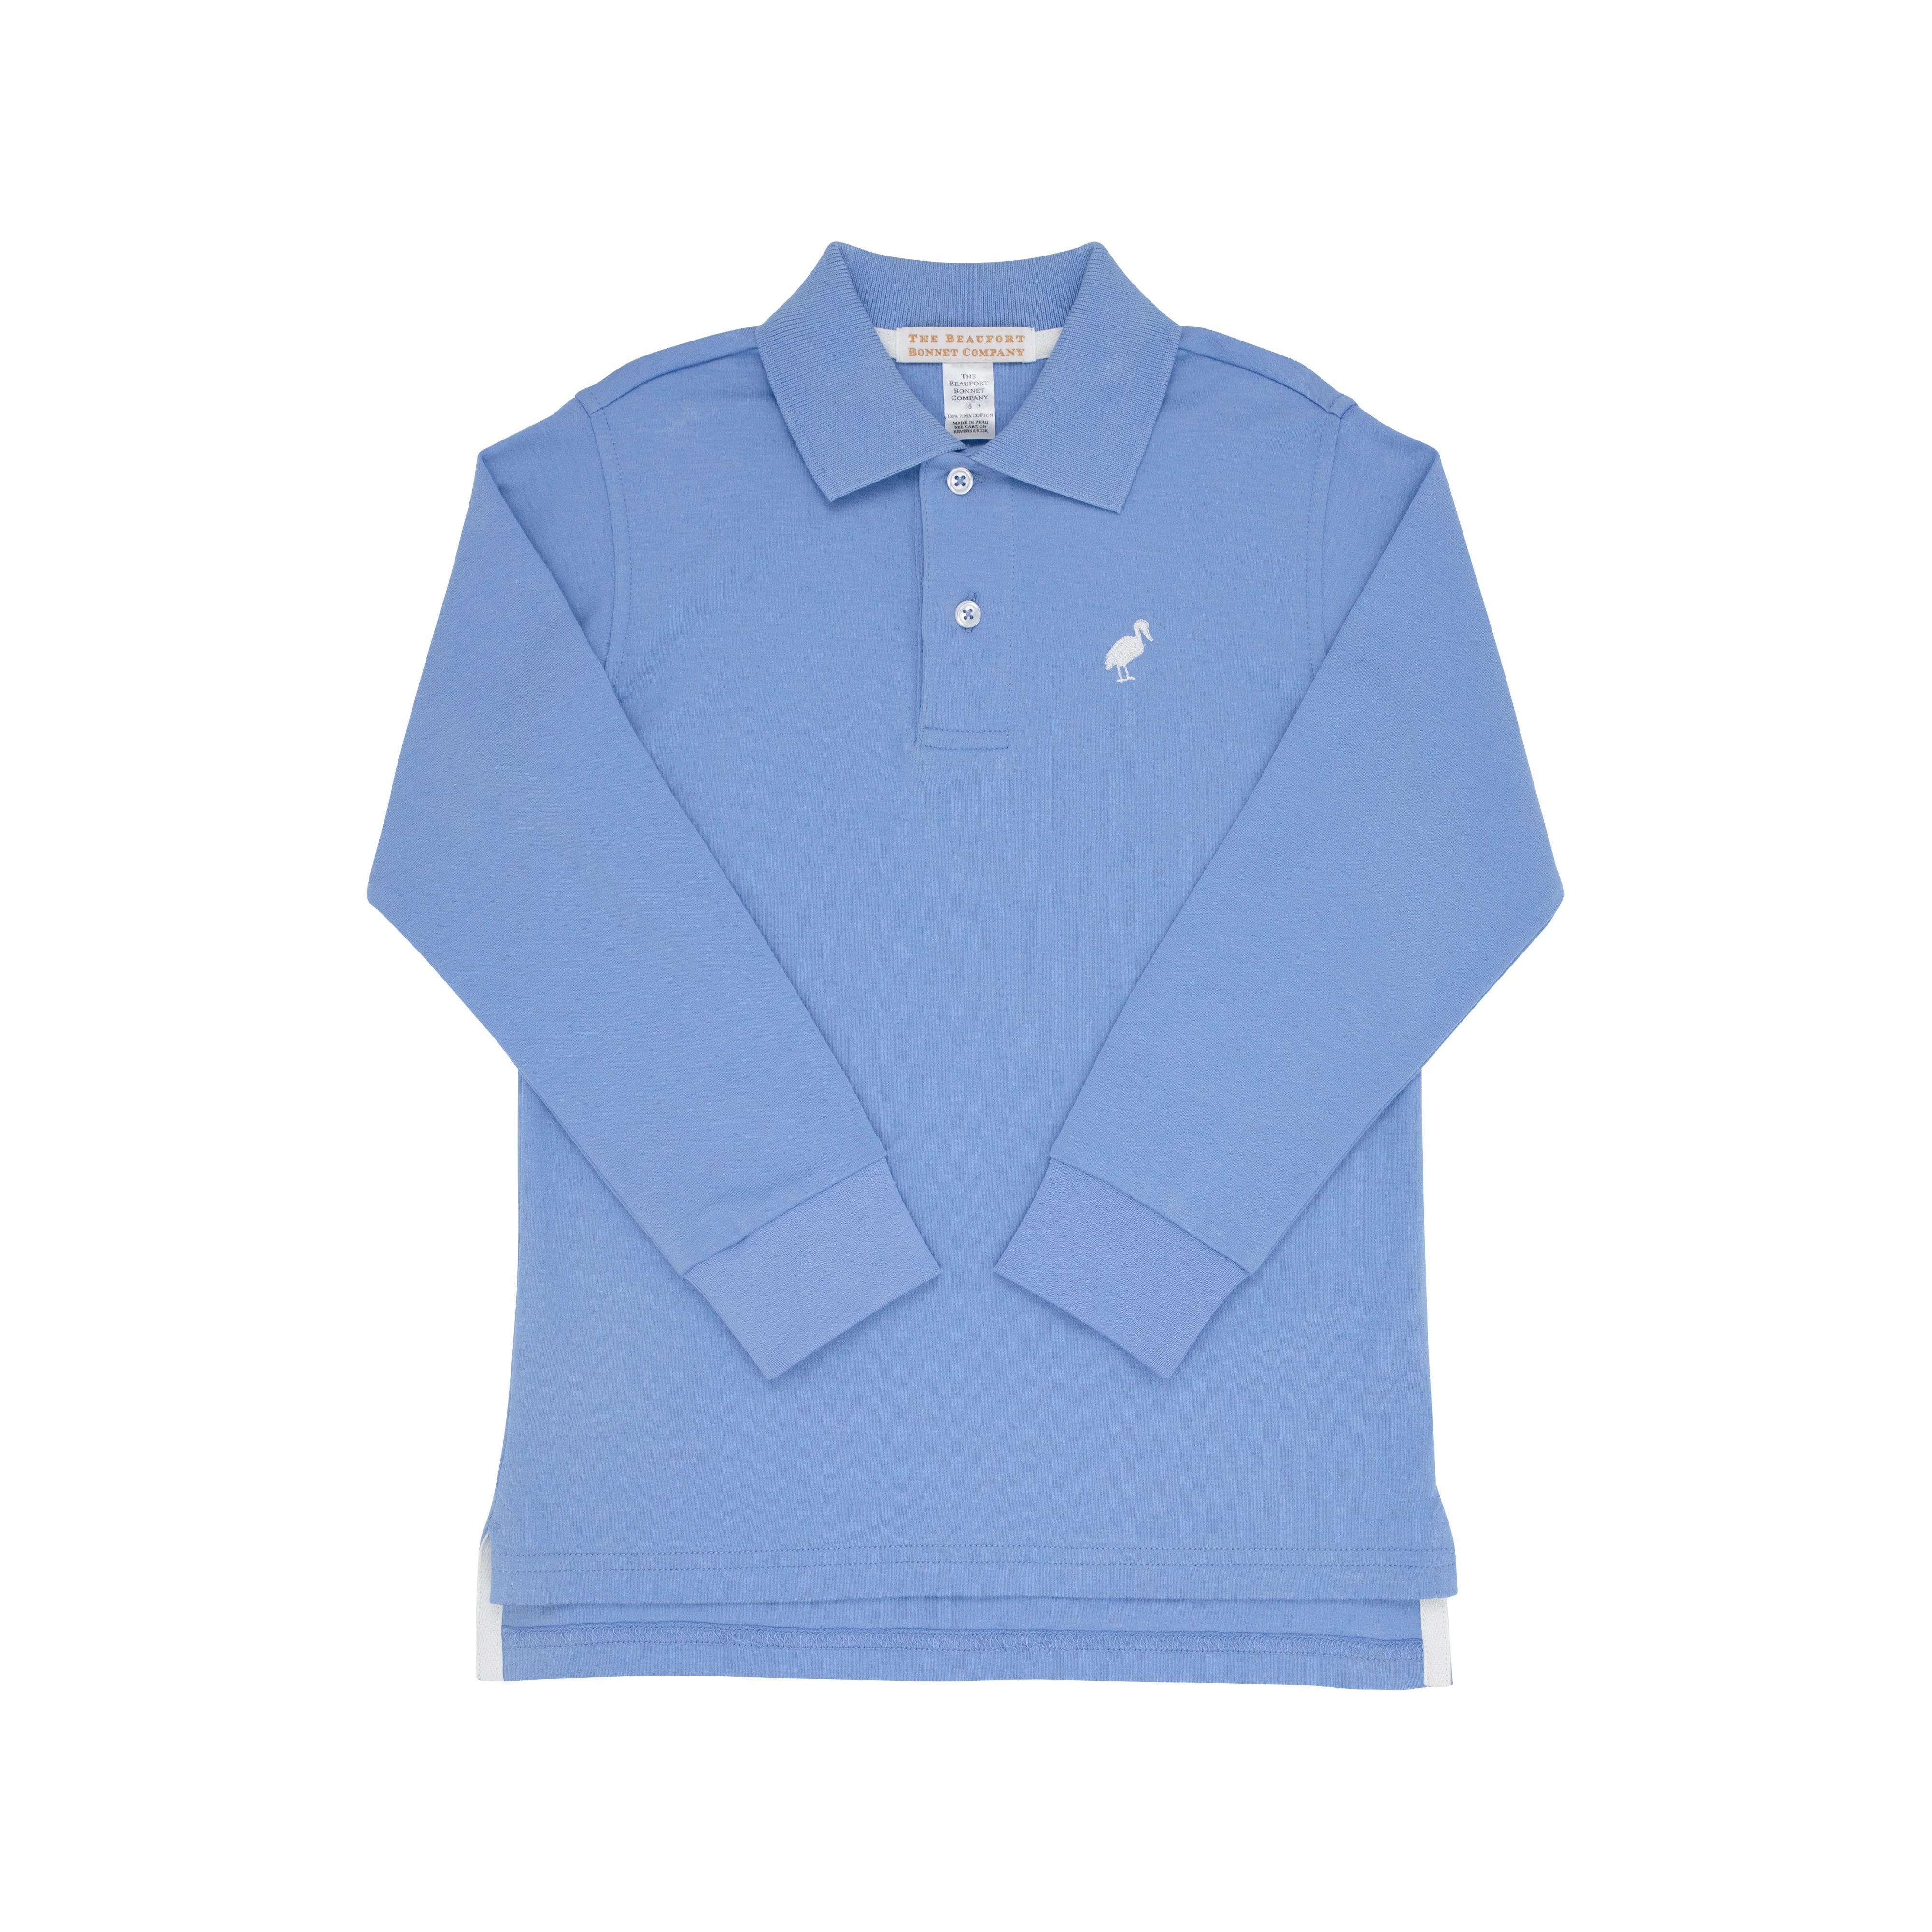 Long Sleeve Prim & Proper Polo & Onesie - Barbados Blue with Worth Avenue White Stork | The Beaufort Bonnet Company